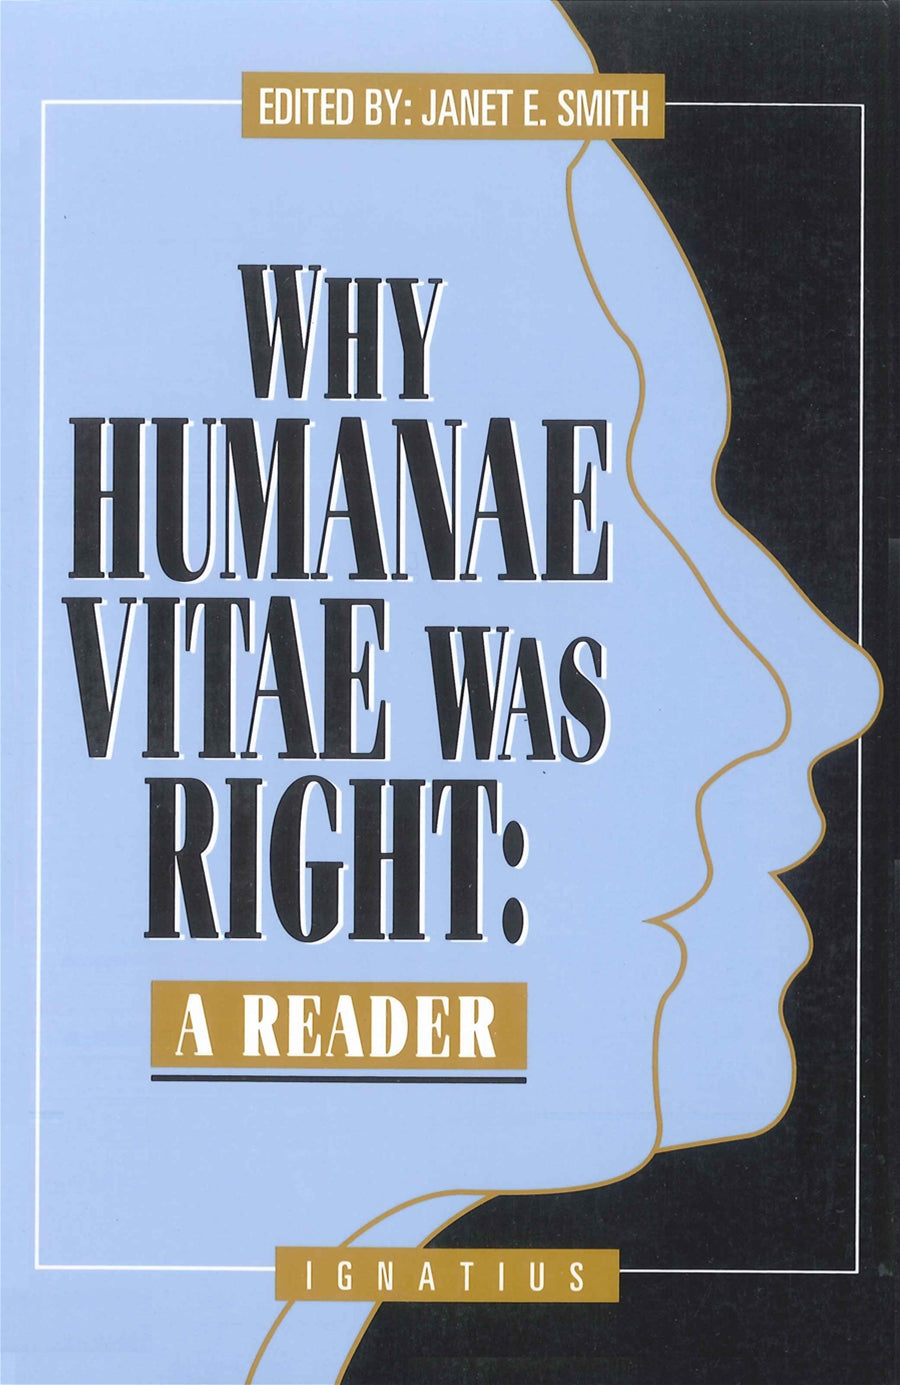 Why Humanae Vitae Was Right